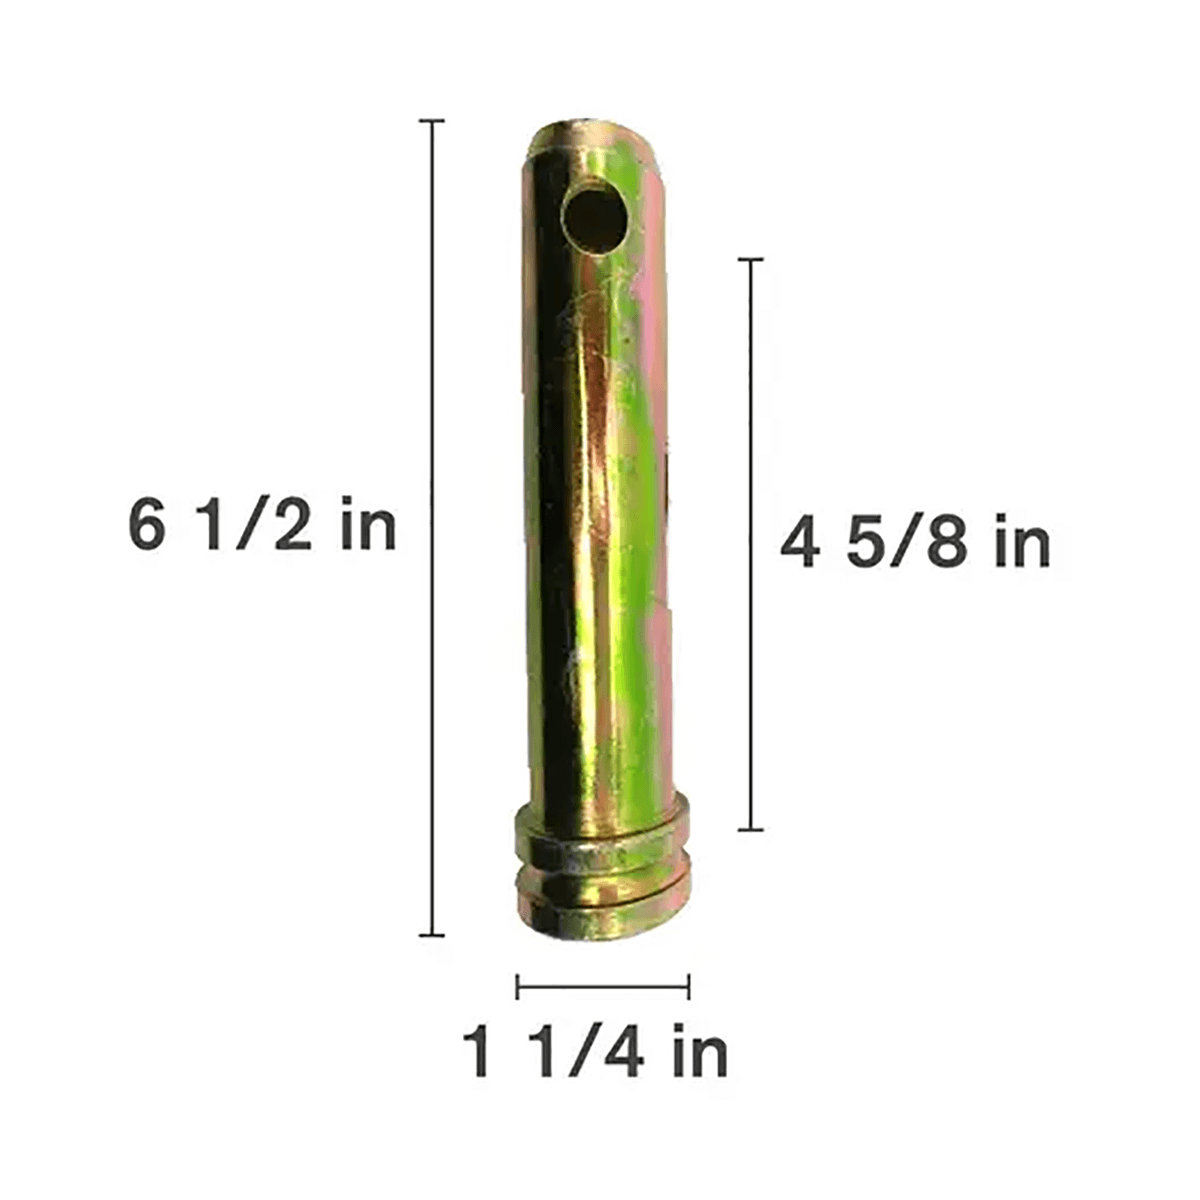 Category 3 Top Link Pin - 1 1/4-in x 4 5/8-in